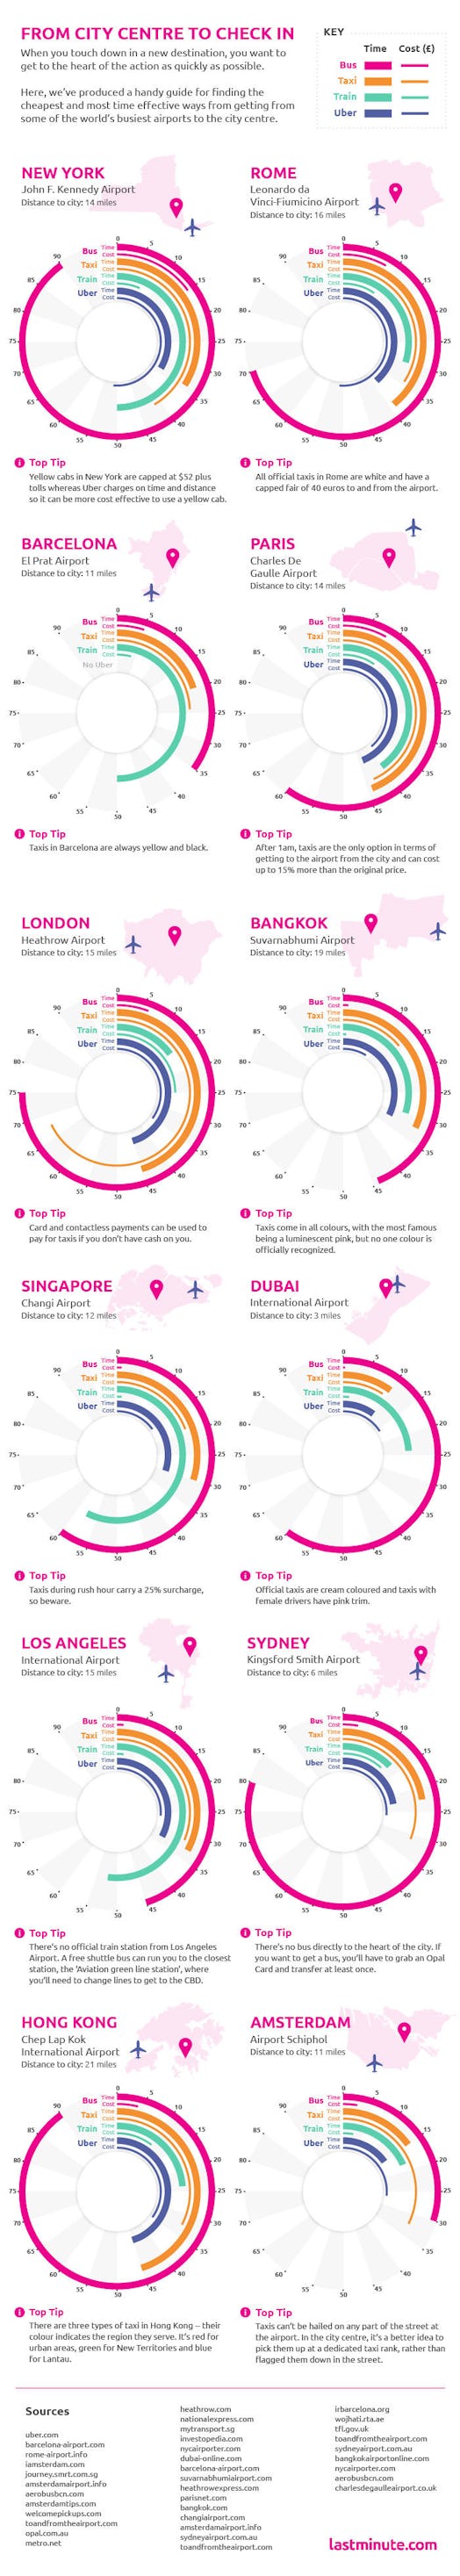 The infographic shows which are the best ways to travel from the airport.